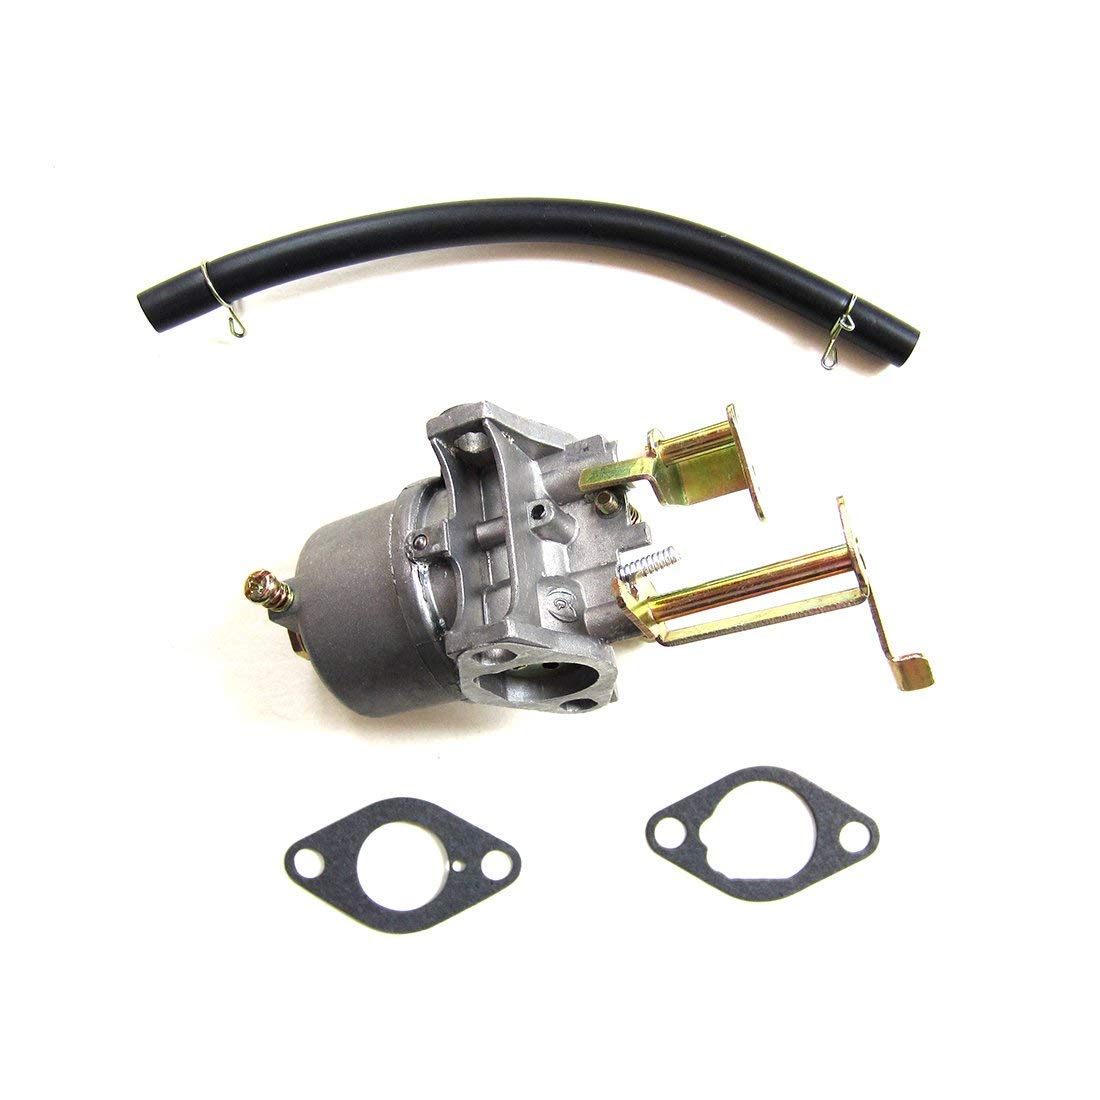 HQparts Carburetor Compatible with Champion Power Equipment 1400 1800 Watts 42432 80CC Gas Generator